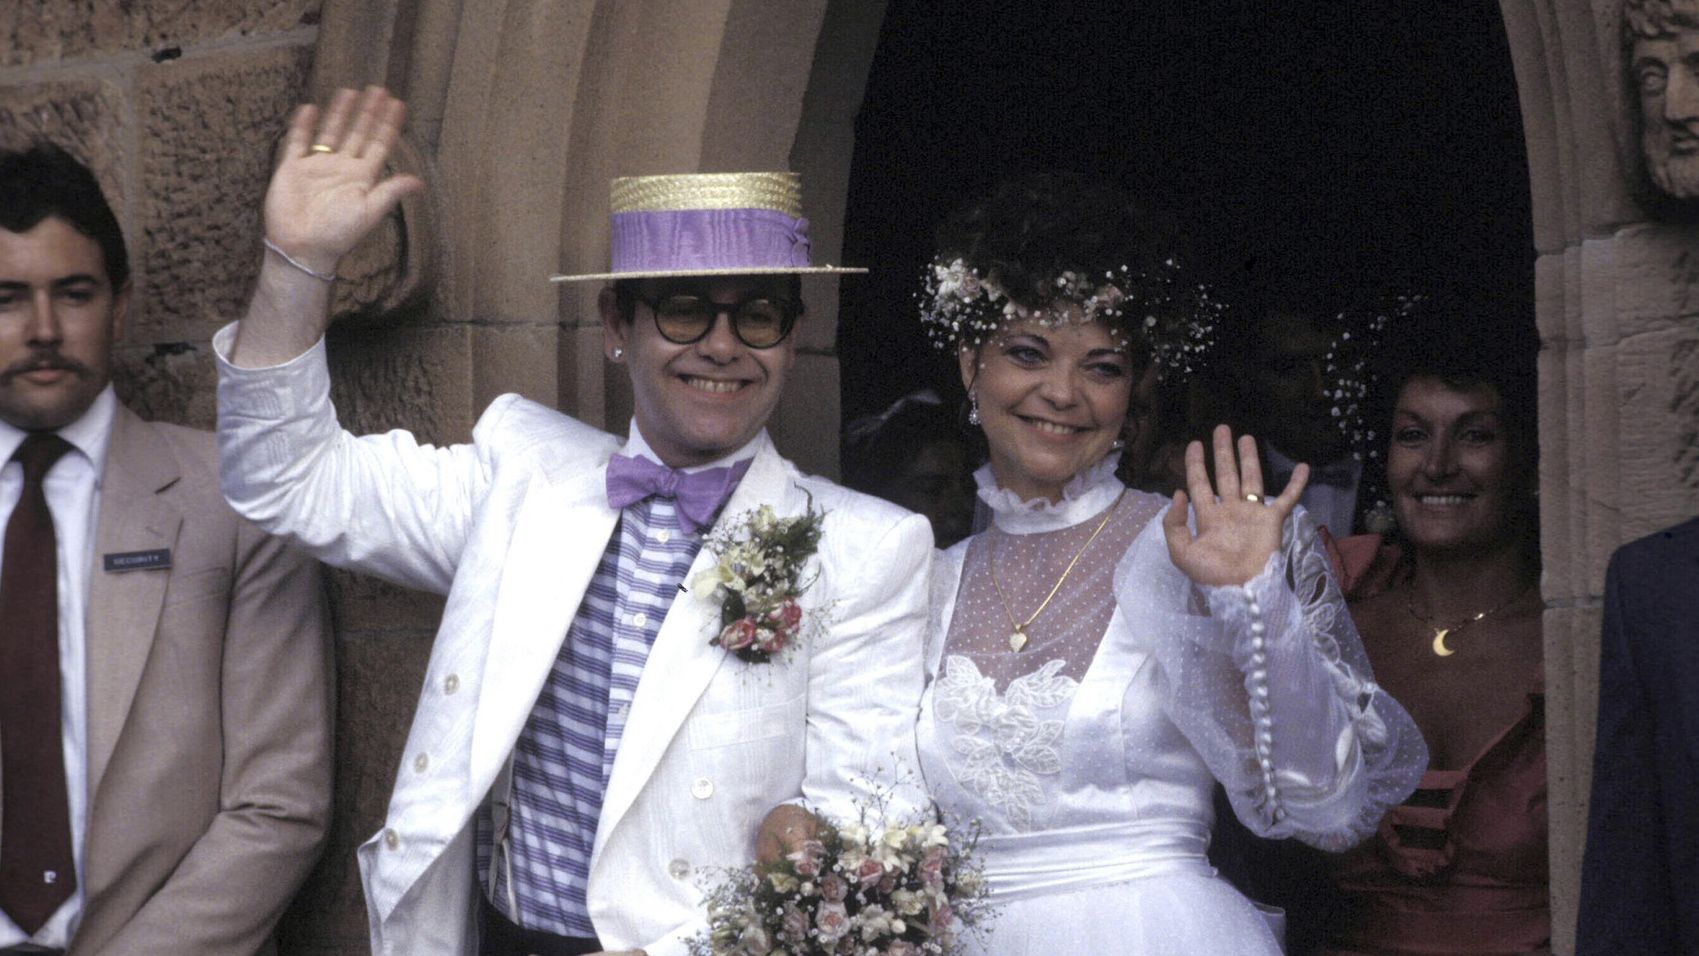 John married German recording engineer Renate Blauel in 1984. They divorced in 1988. and John told Rolling Stone magazine that year he was "comfortable" being gay. He told the magazine in 1976 that he was bisexual.